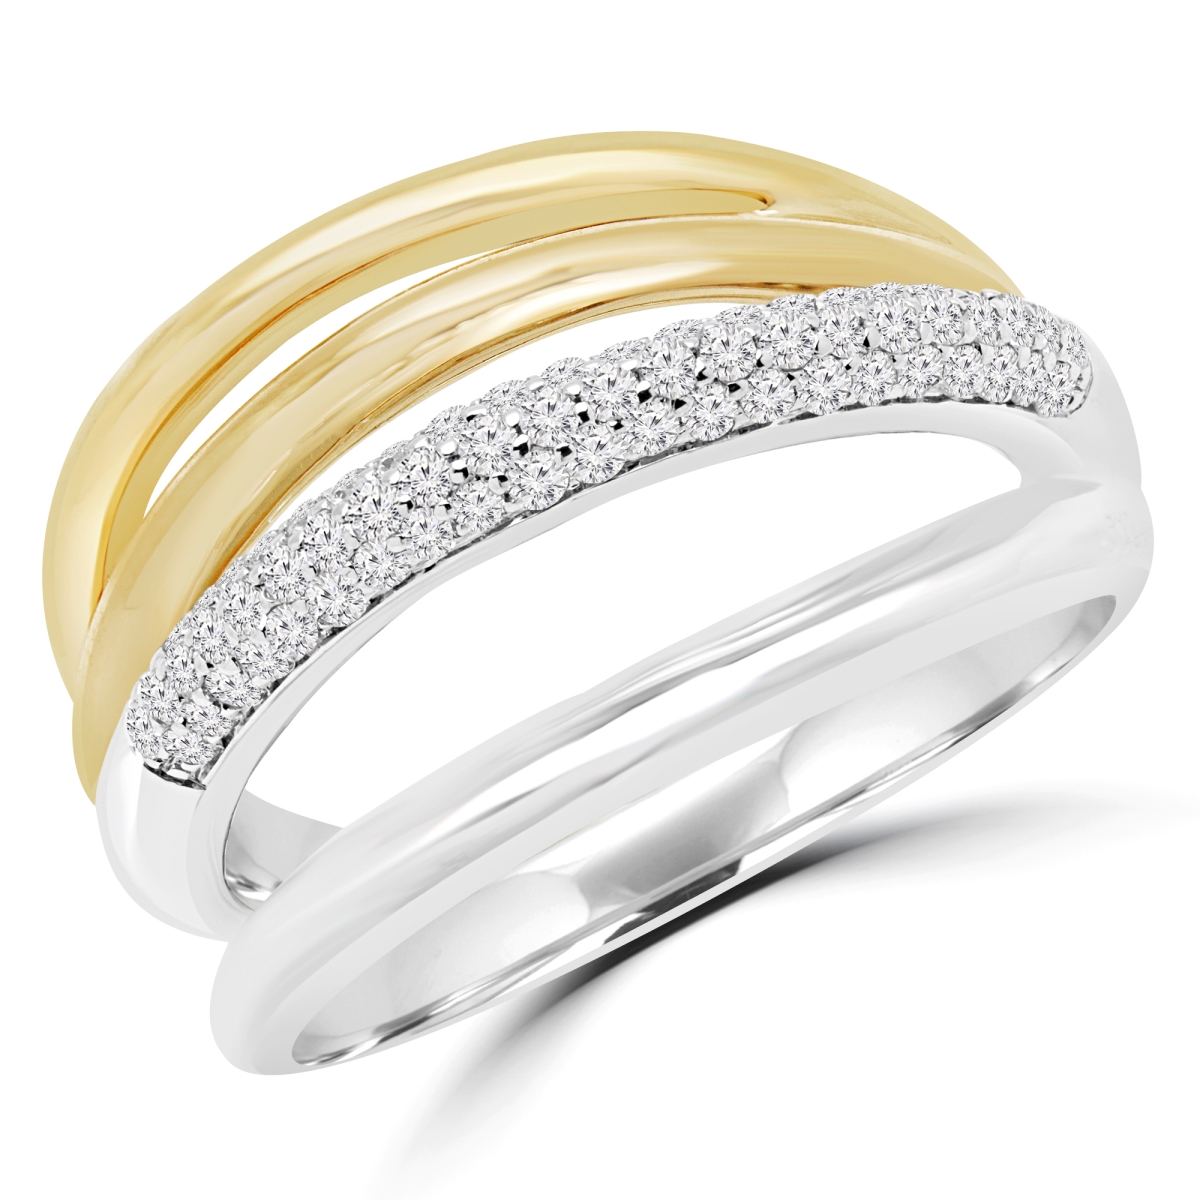 Picture of Majesty Diamonds MDR170050-3.25 0.37 CTW Round Diamond Cocktail Semi-Eternity Ring in 14K Two-Tone Gold - 3.25